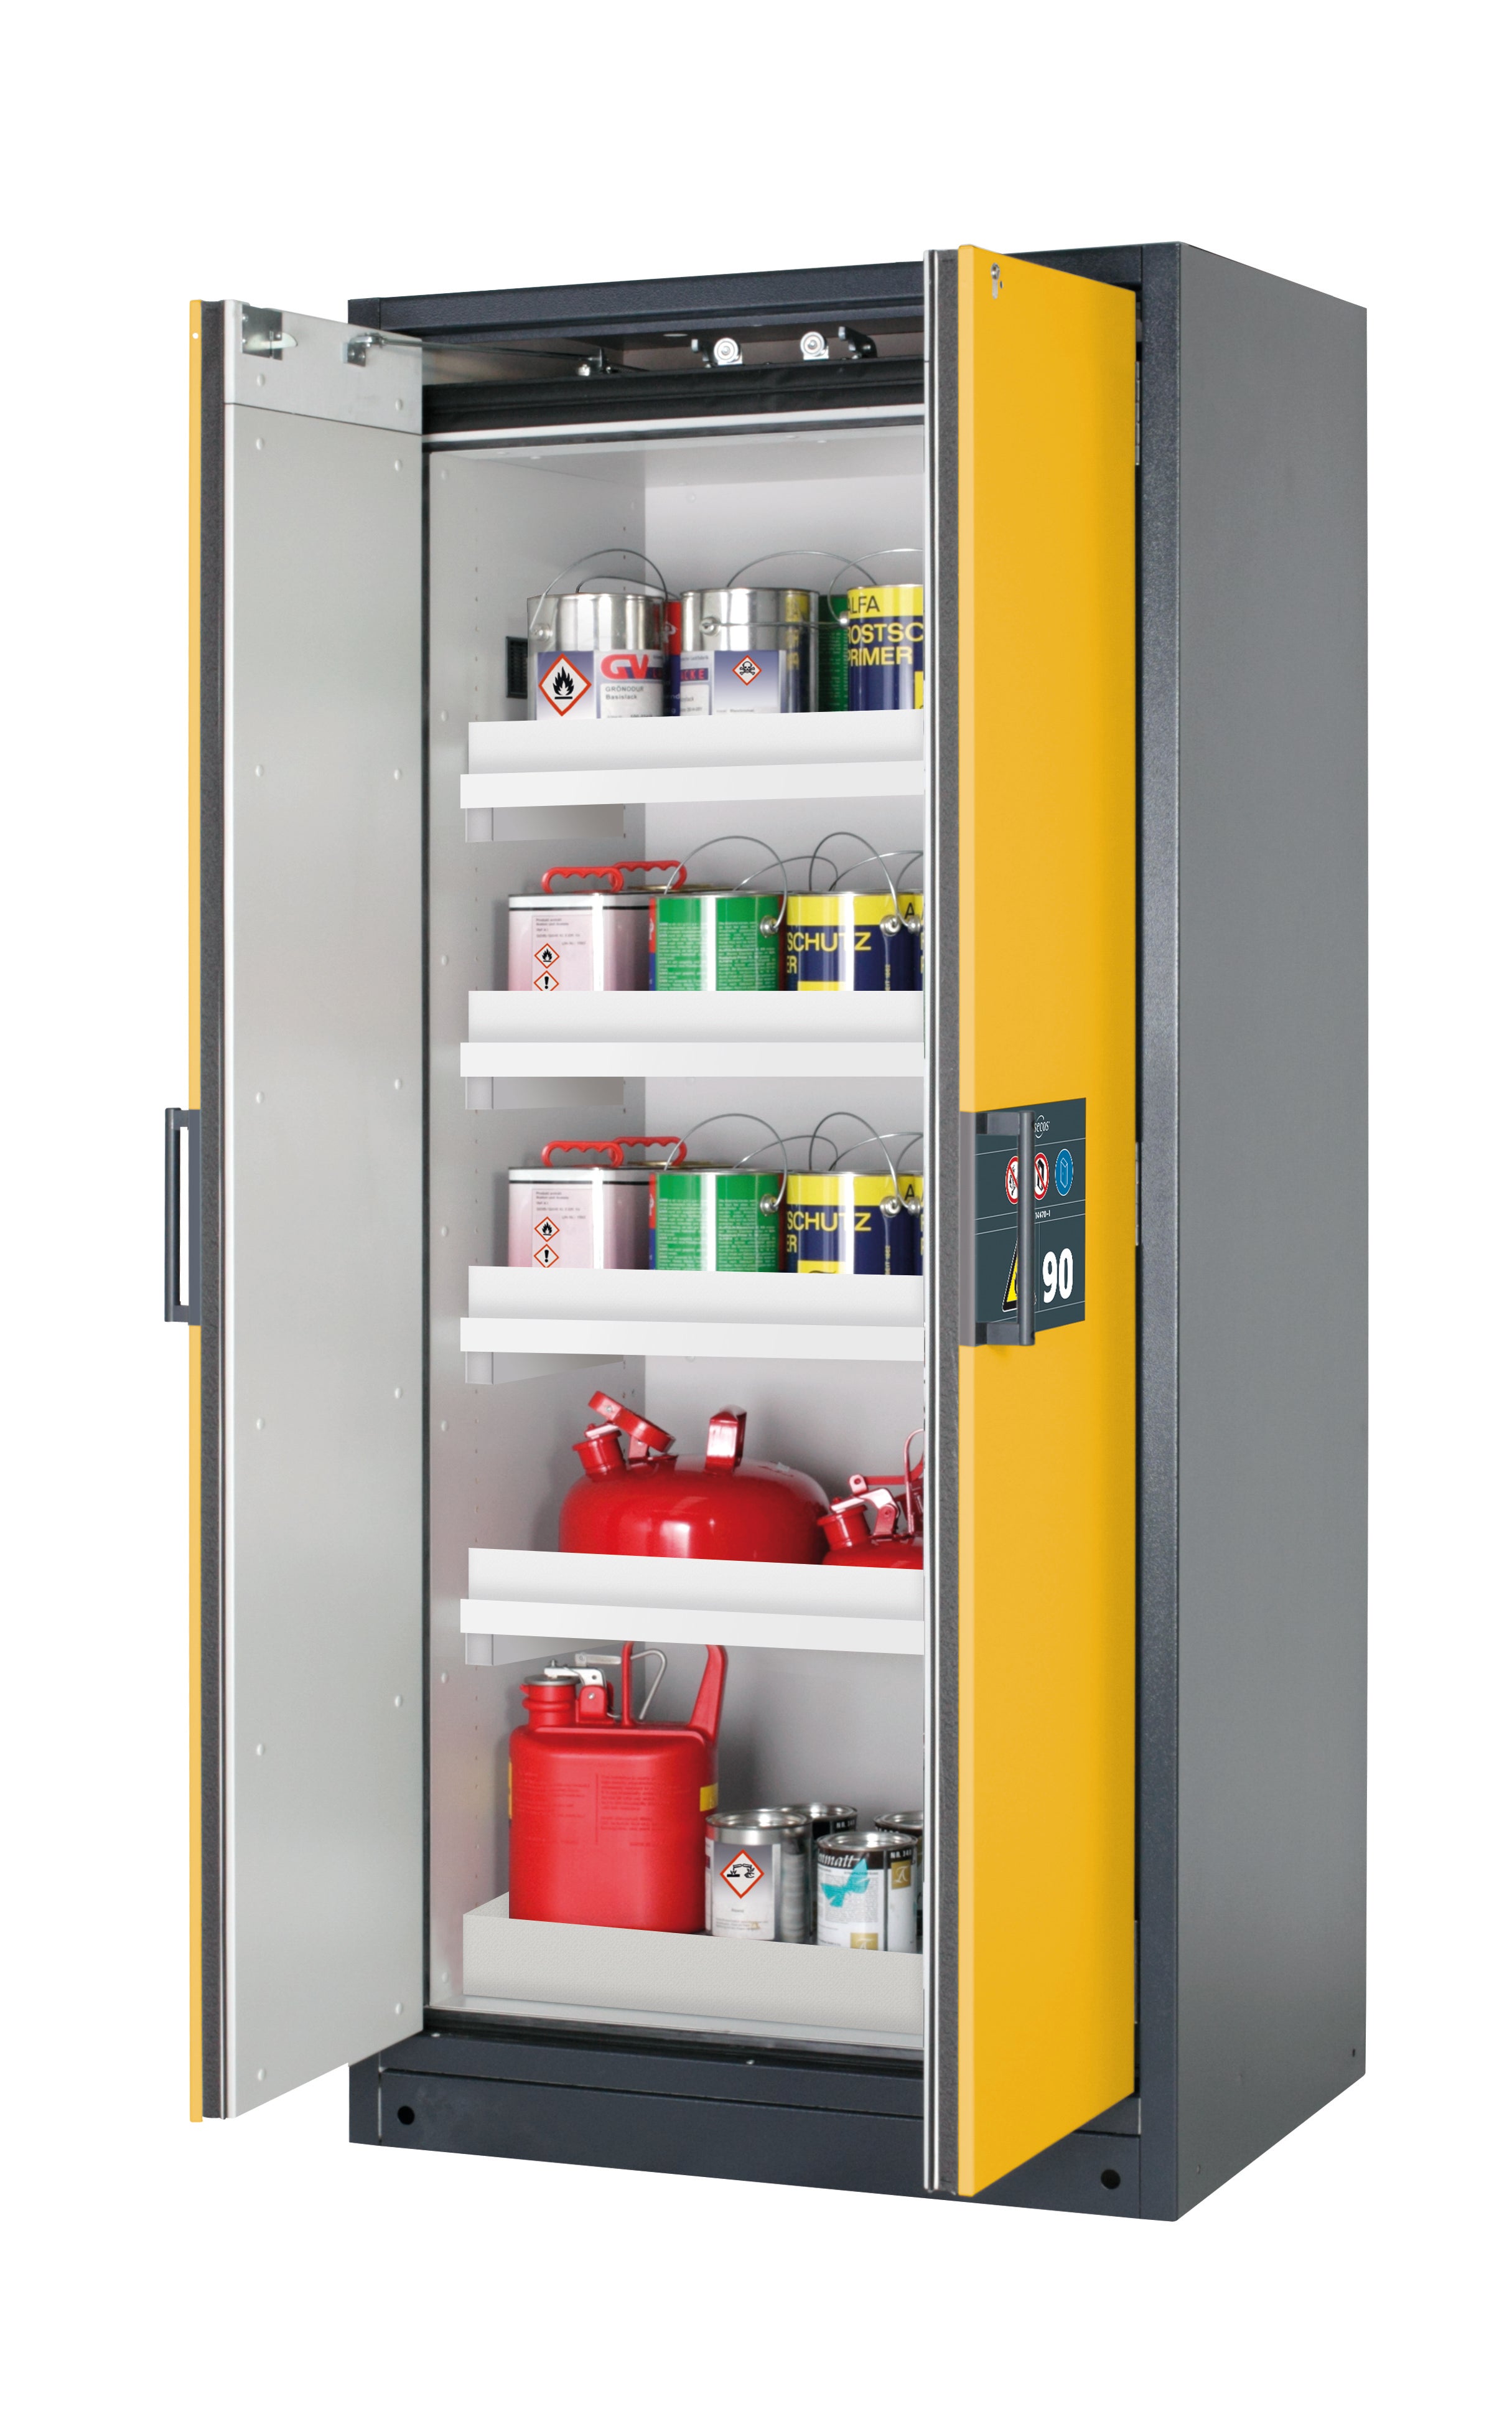 Type 90 safety storage cabinet Q-CLASSIC-90 model Q90.195.090 in warning yellow RAL 1004 with 4x tray shelf (standard) (polypropylene),